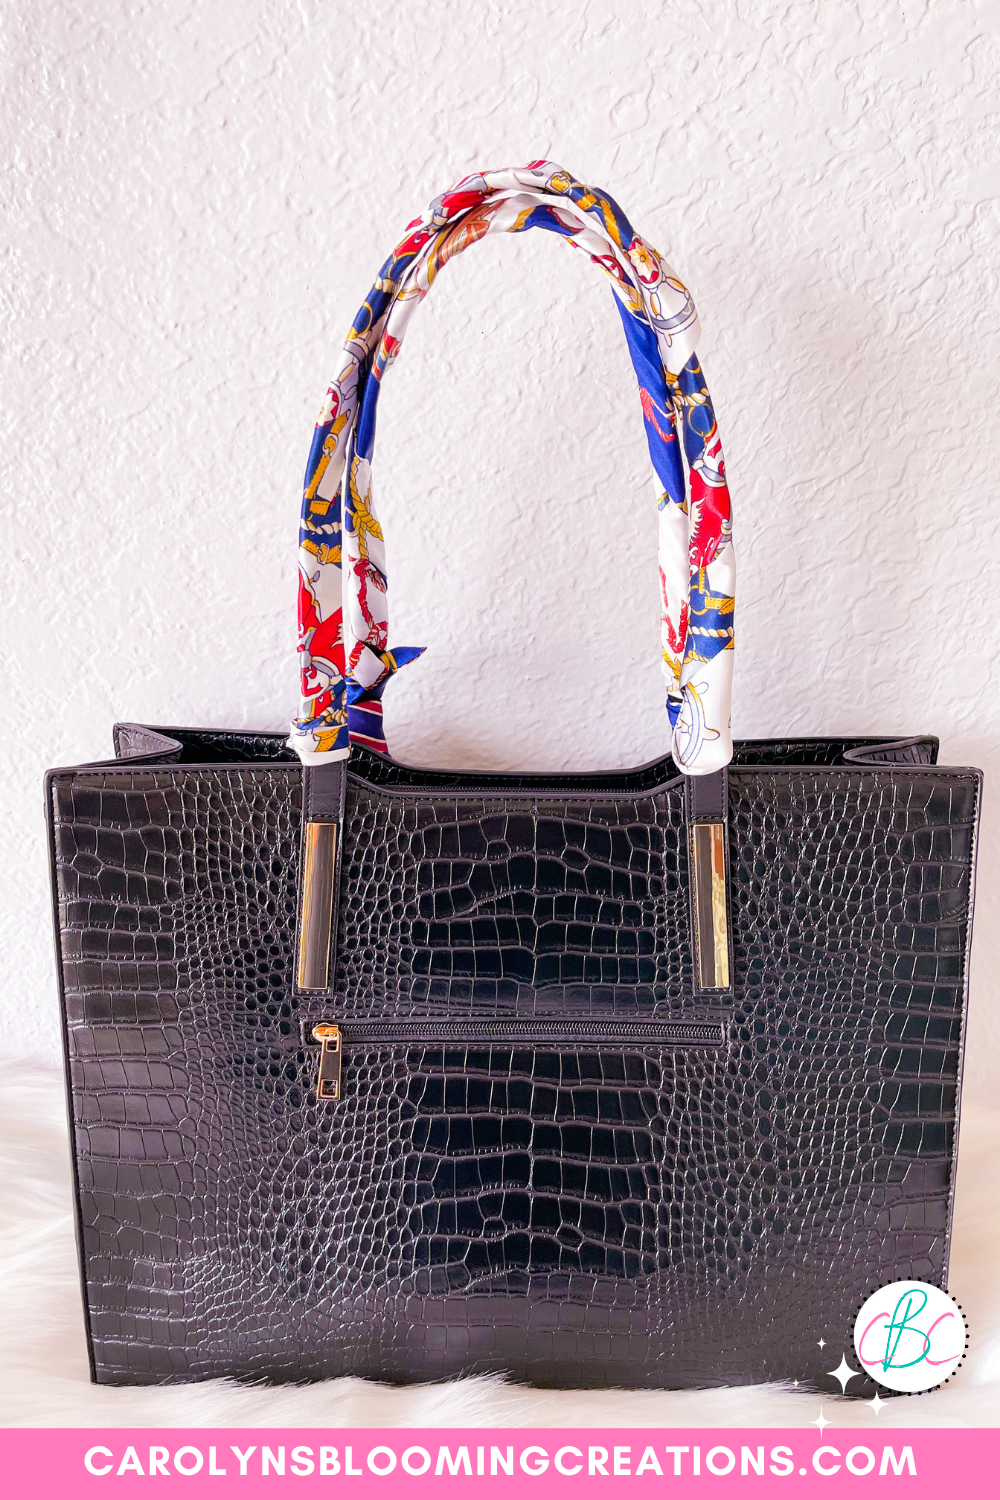 2 Stylish Ways to Tie a Bag Handle Wrap - Infinite Blog by Style Theory